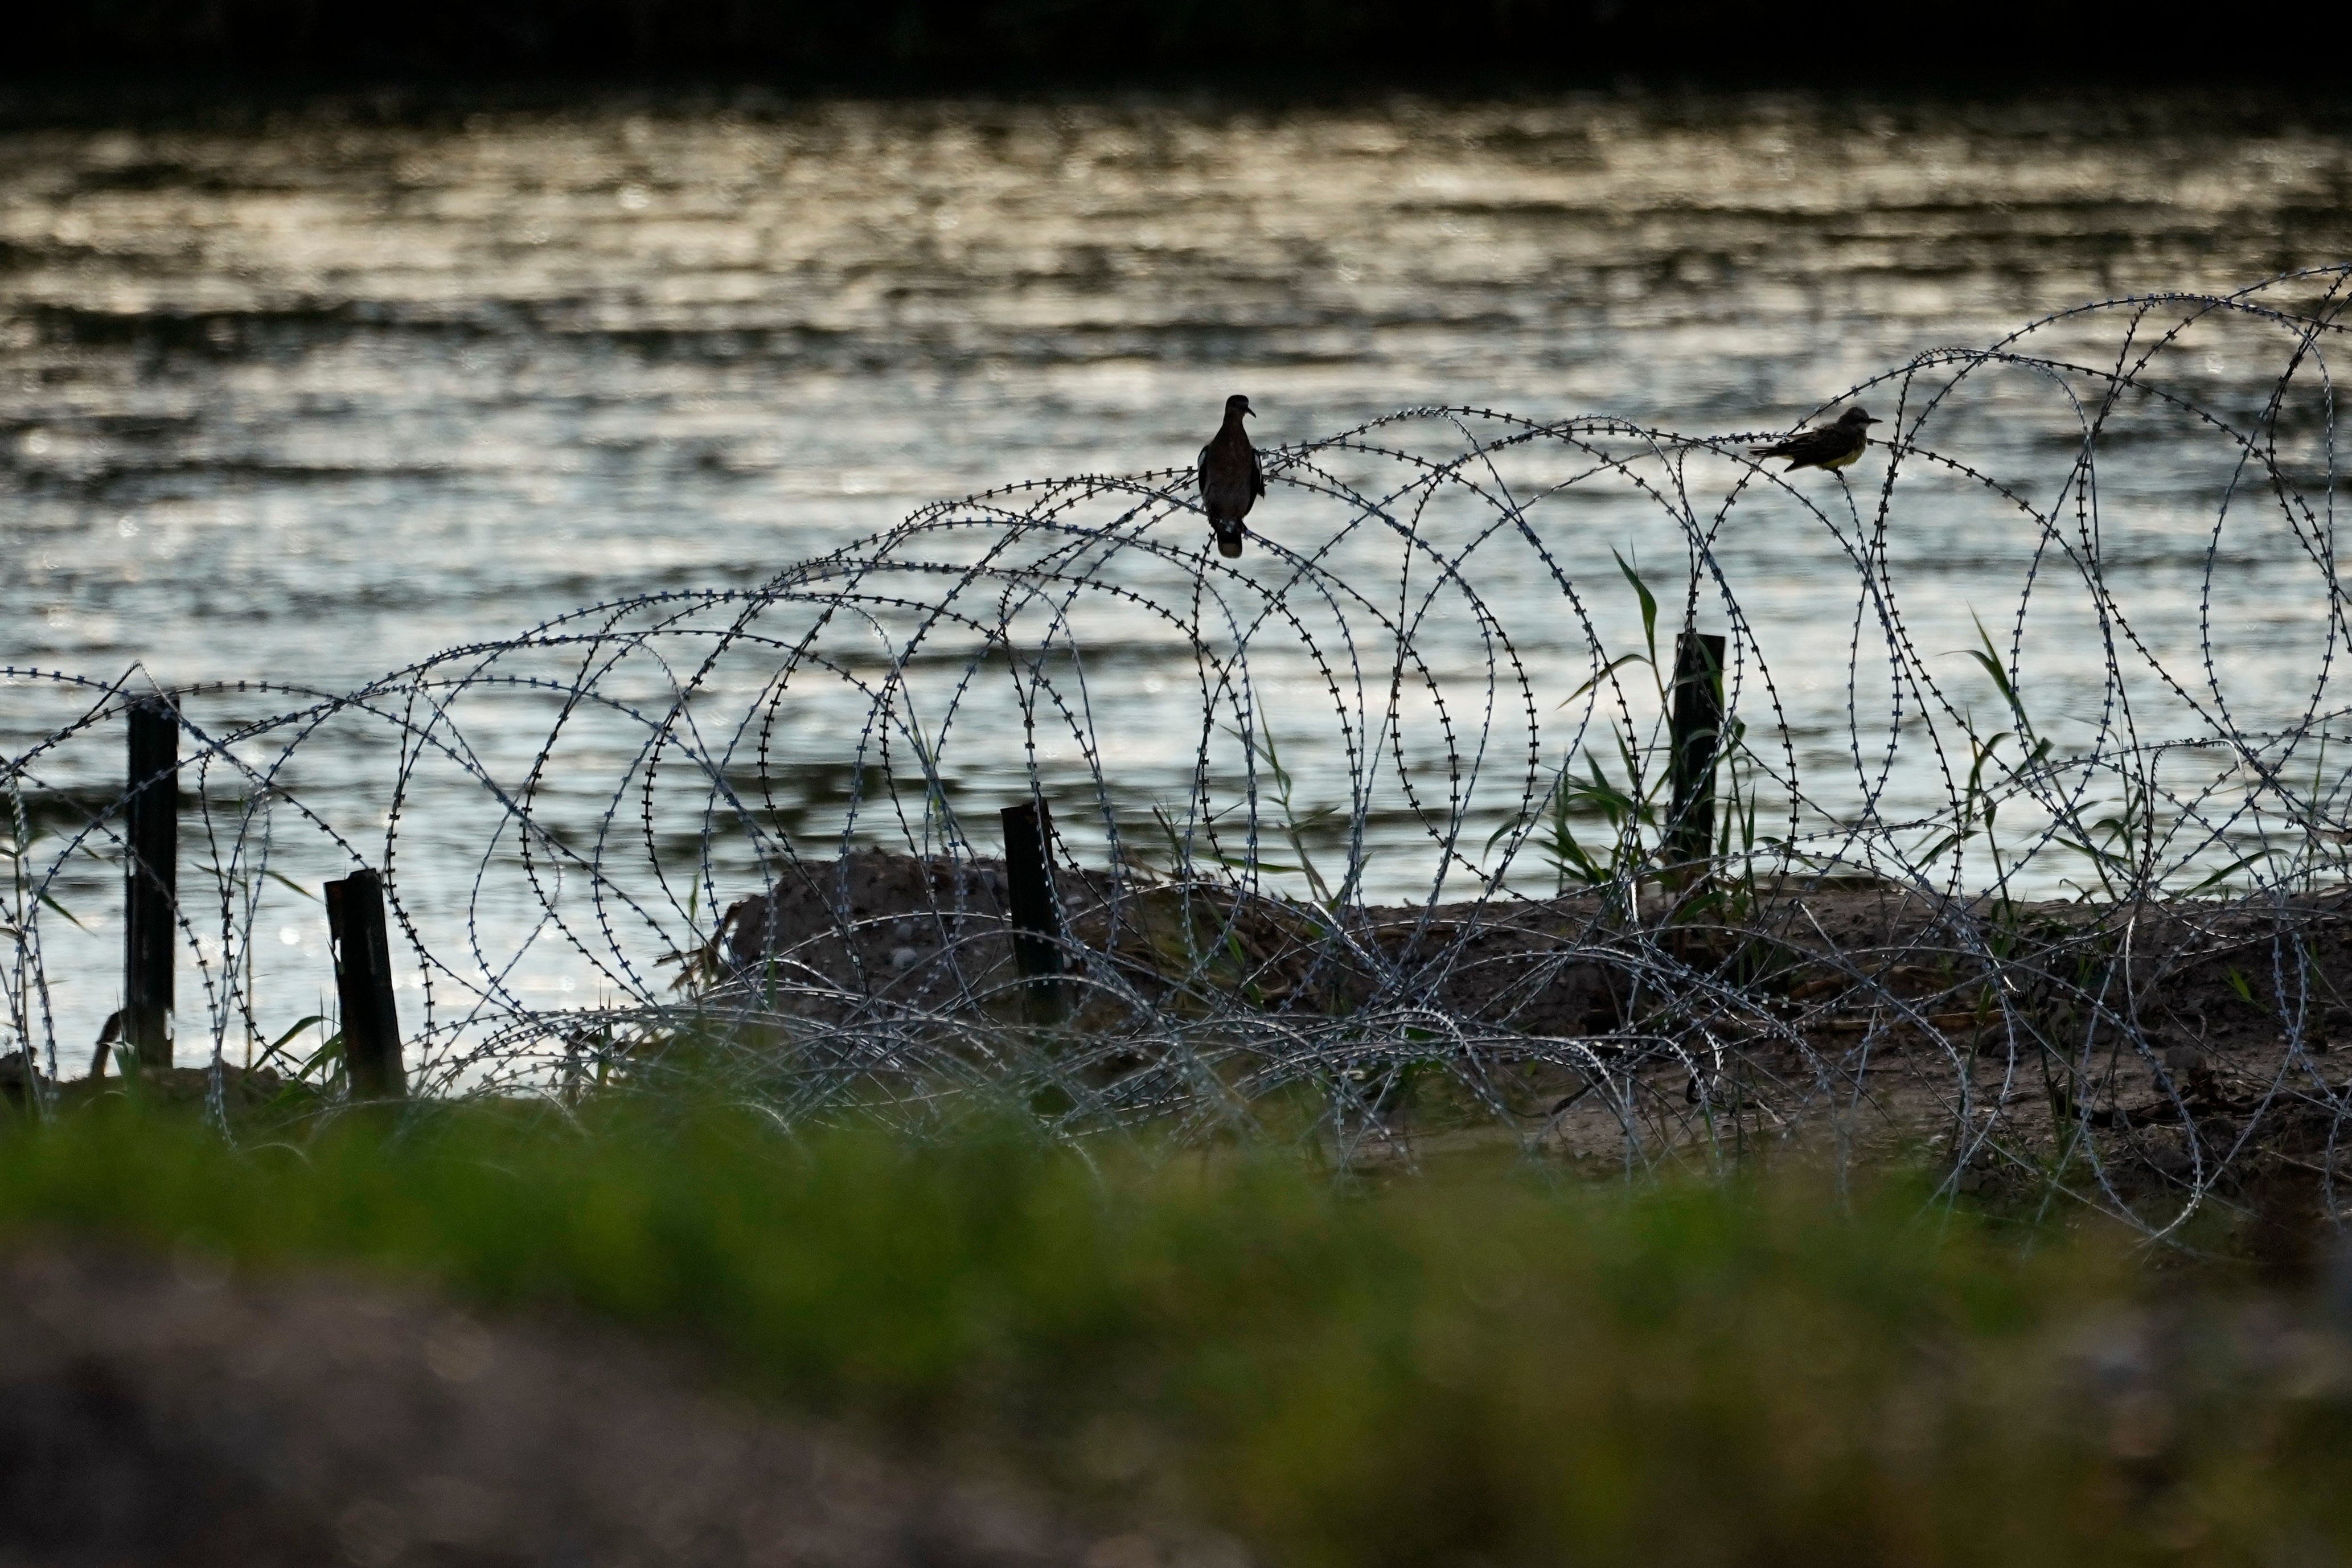 Birds rest on concertina wire, or razor wire, along the Rio Grande in Eagle Pass, Texas, July 6, 2023